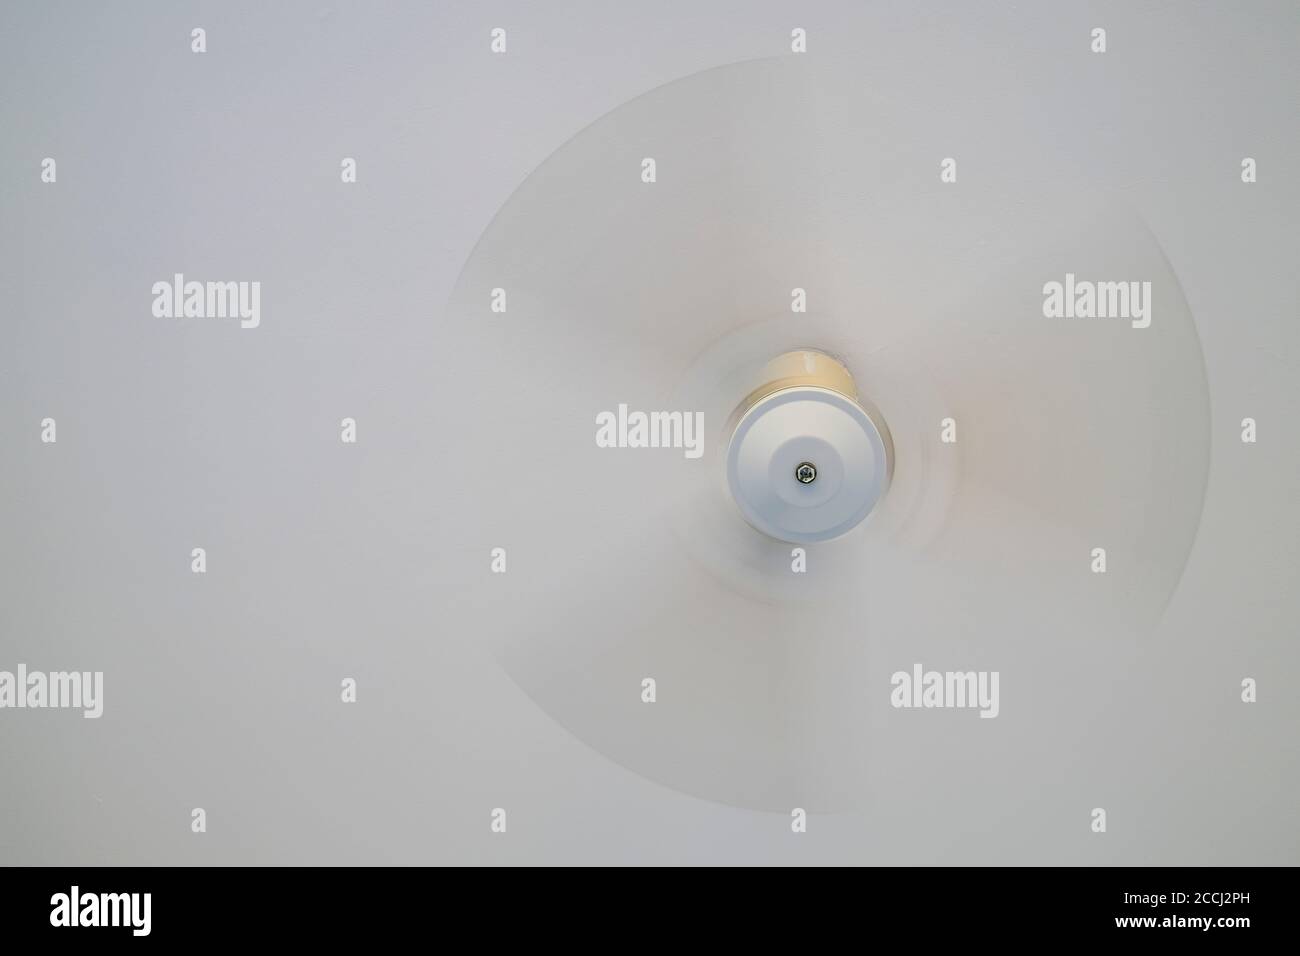 Ceiling fan turning under a white ceiling Stock Photo